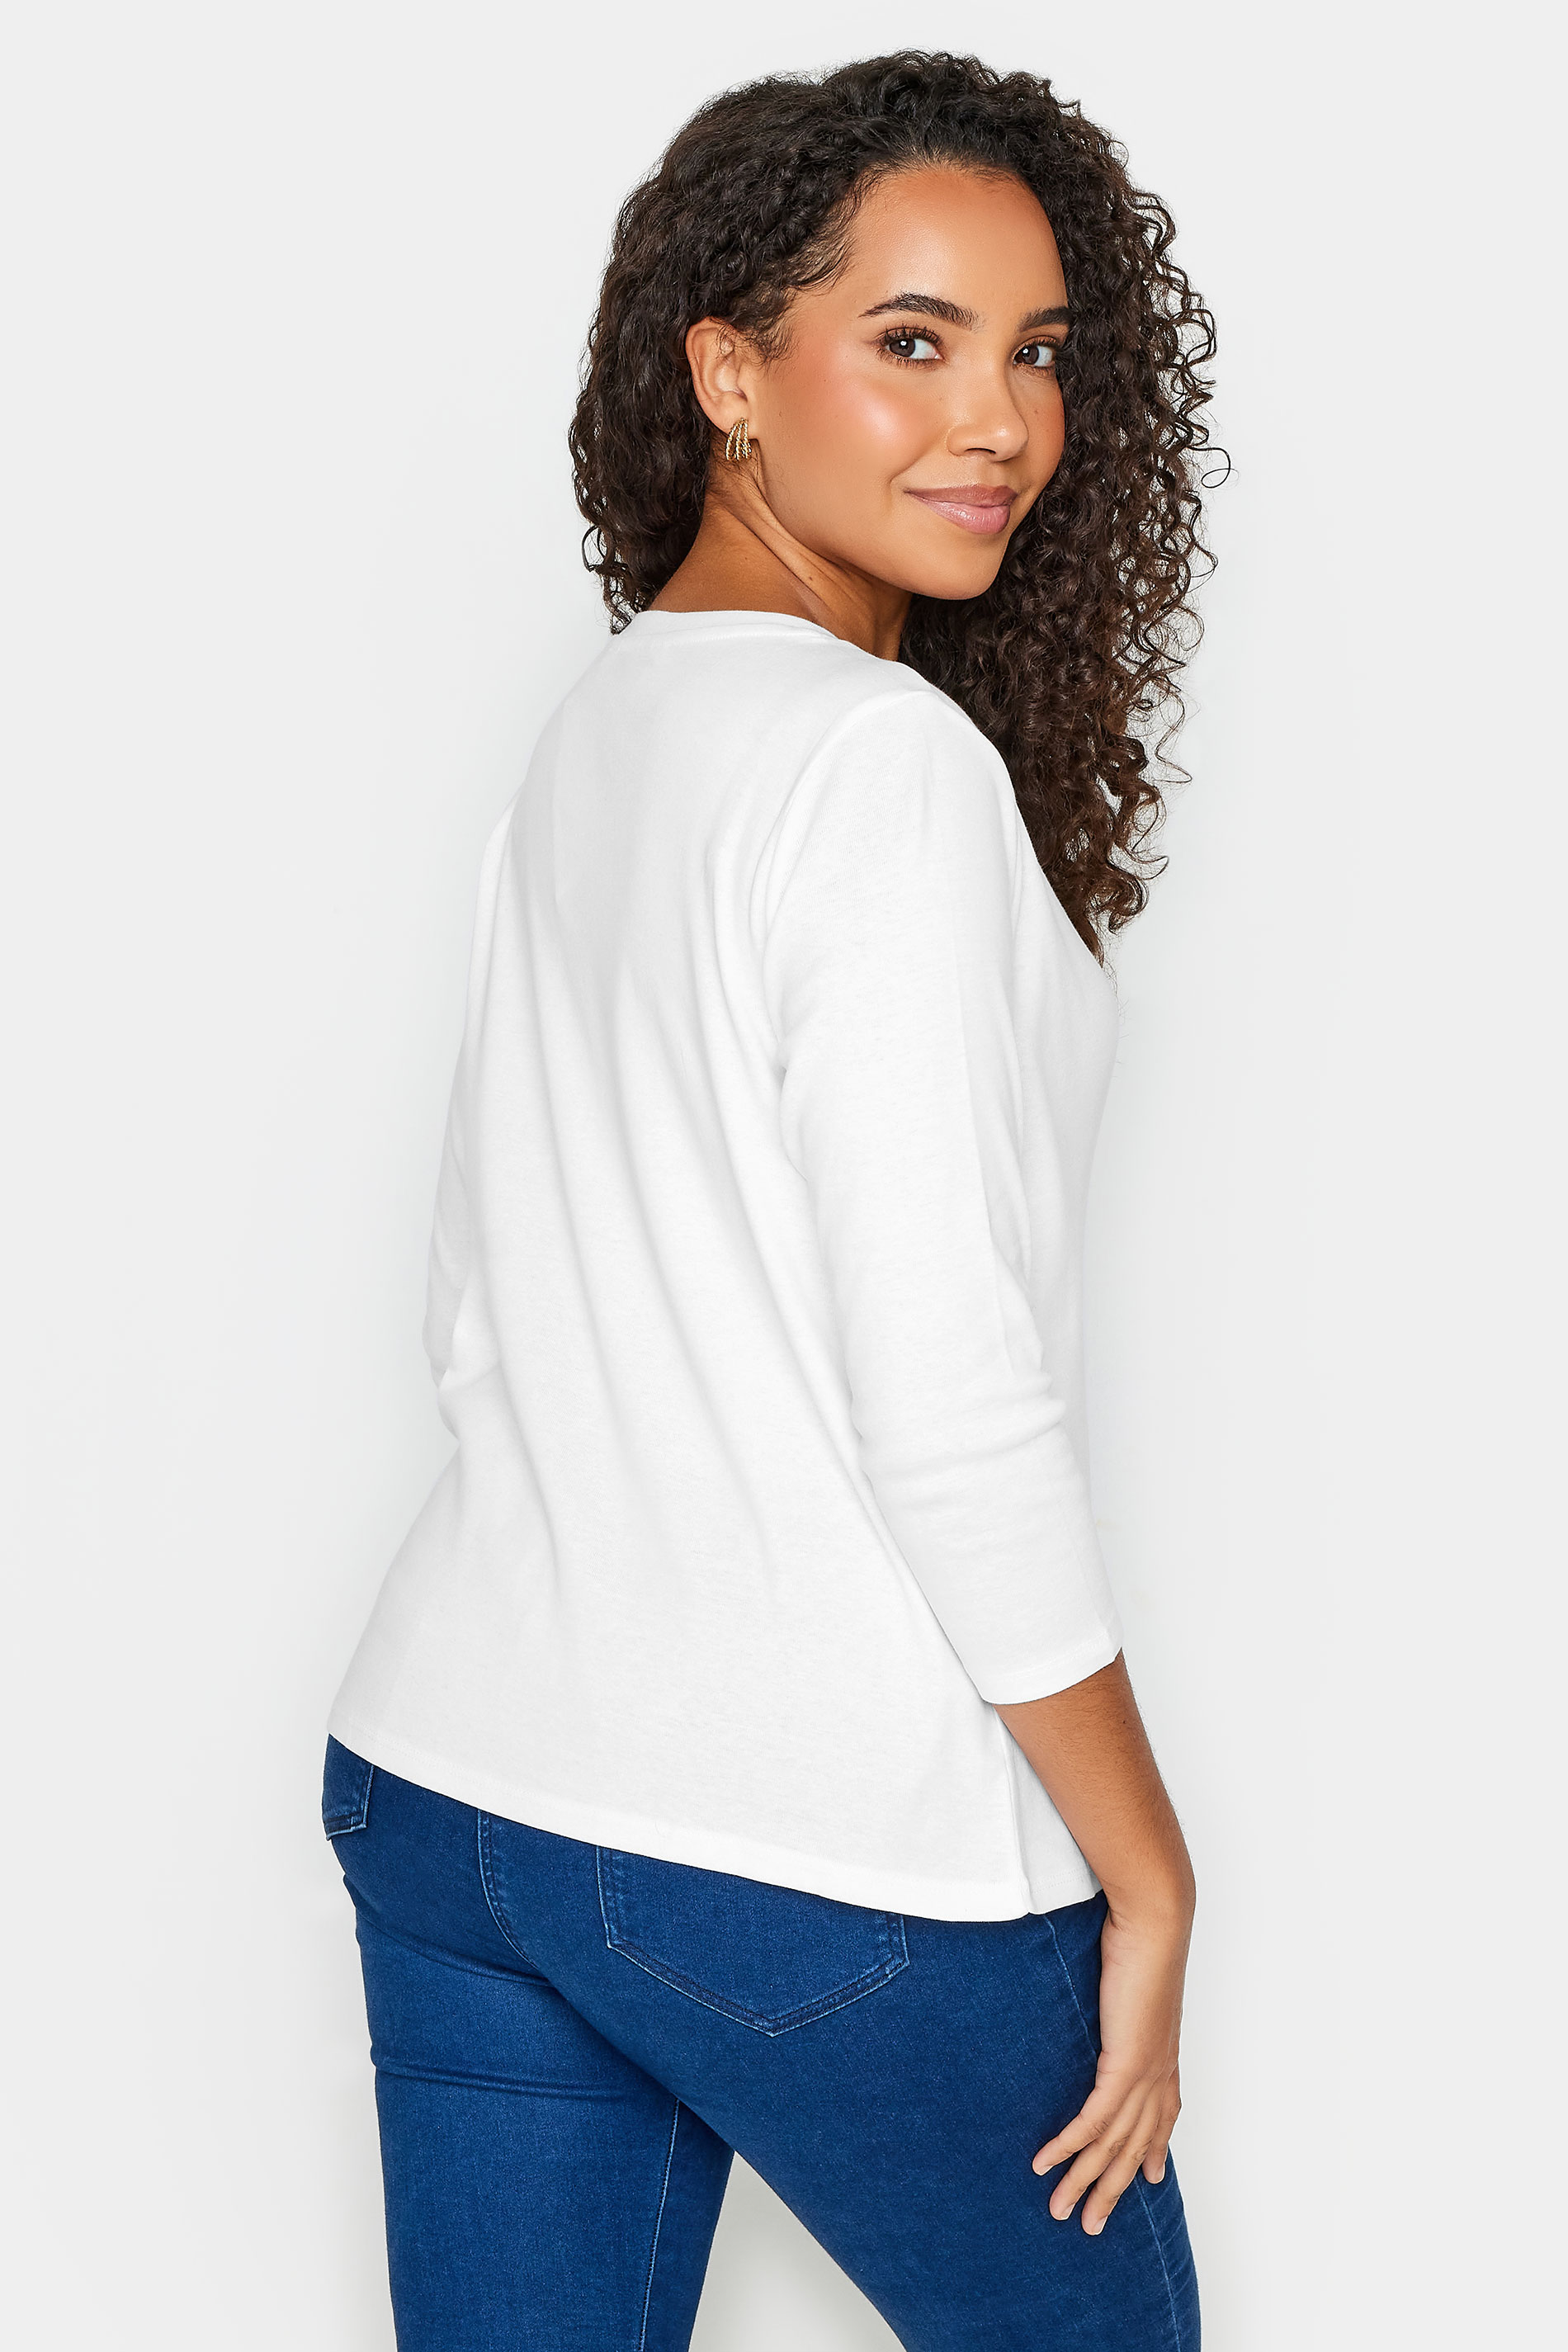 M&Co White 3/4 Sleeve Cotton Top | M&Co  3